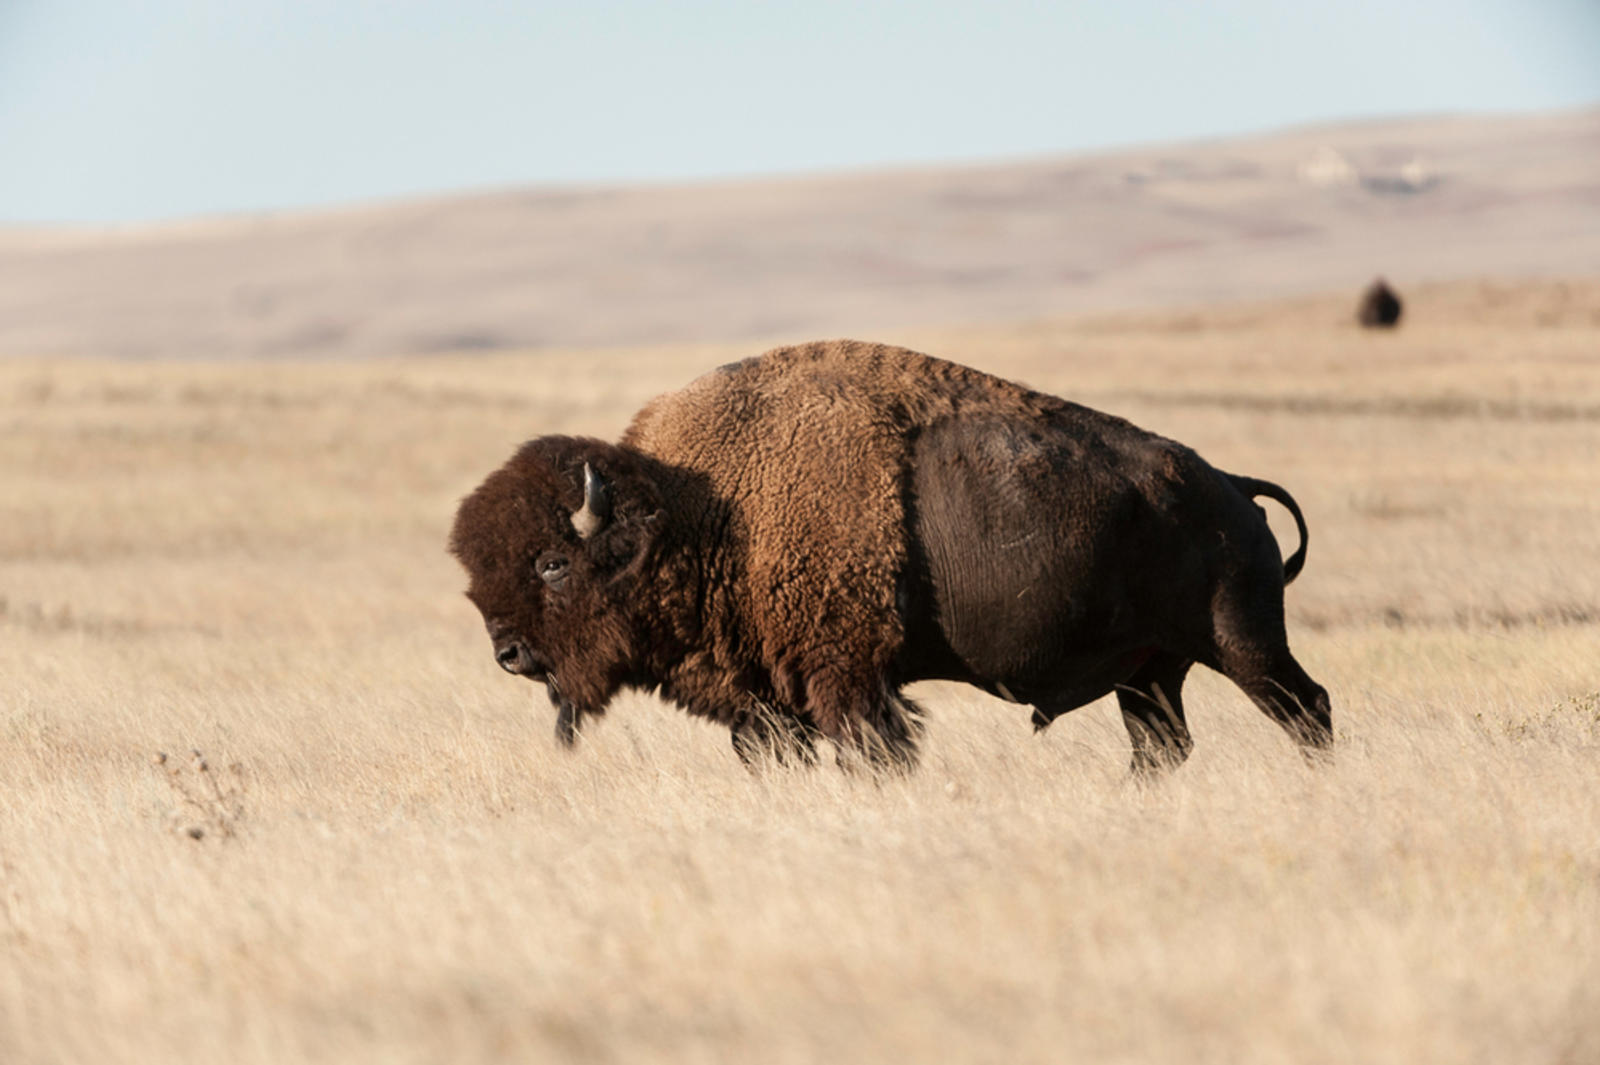 Between 30 and 60 million buffalo used to roam the Great Plains, but by 1900 there were less than 1000 left in North America. In addition to providing food security, the bison are expected to restore the reservation’s dying grasslands, as they have done in other parts of South Dakota.